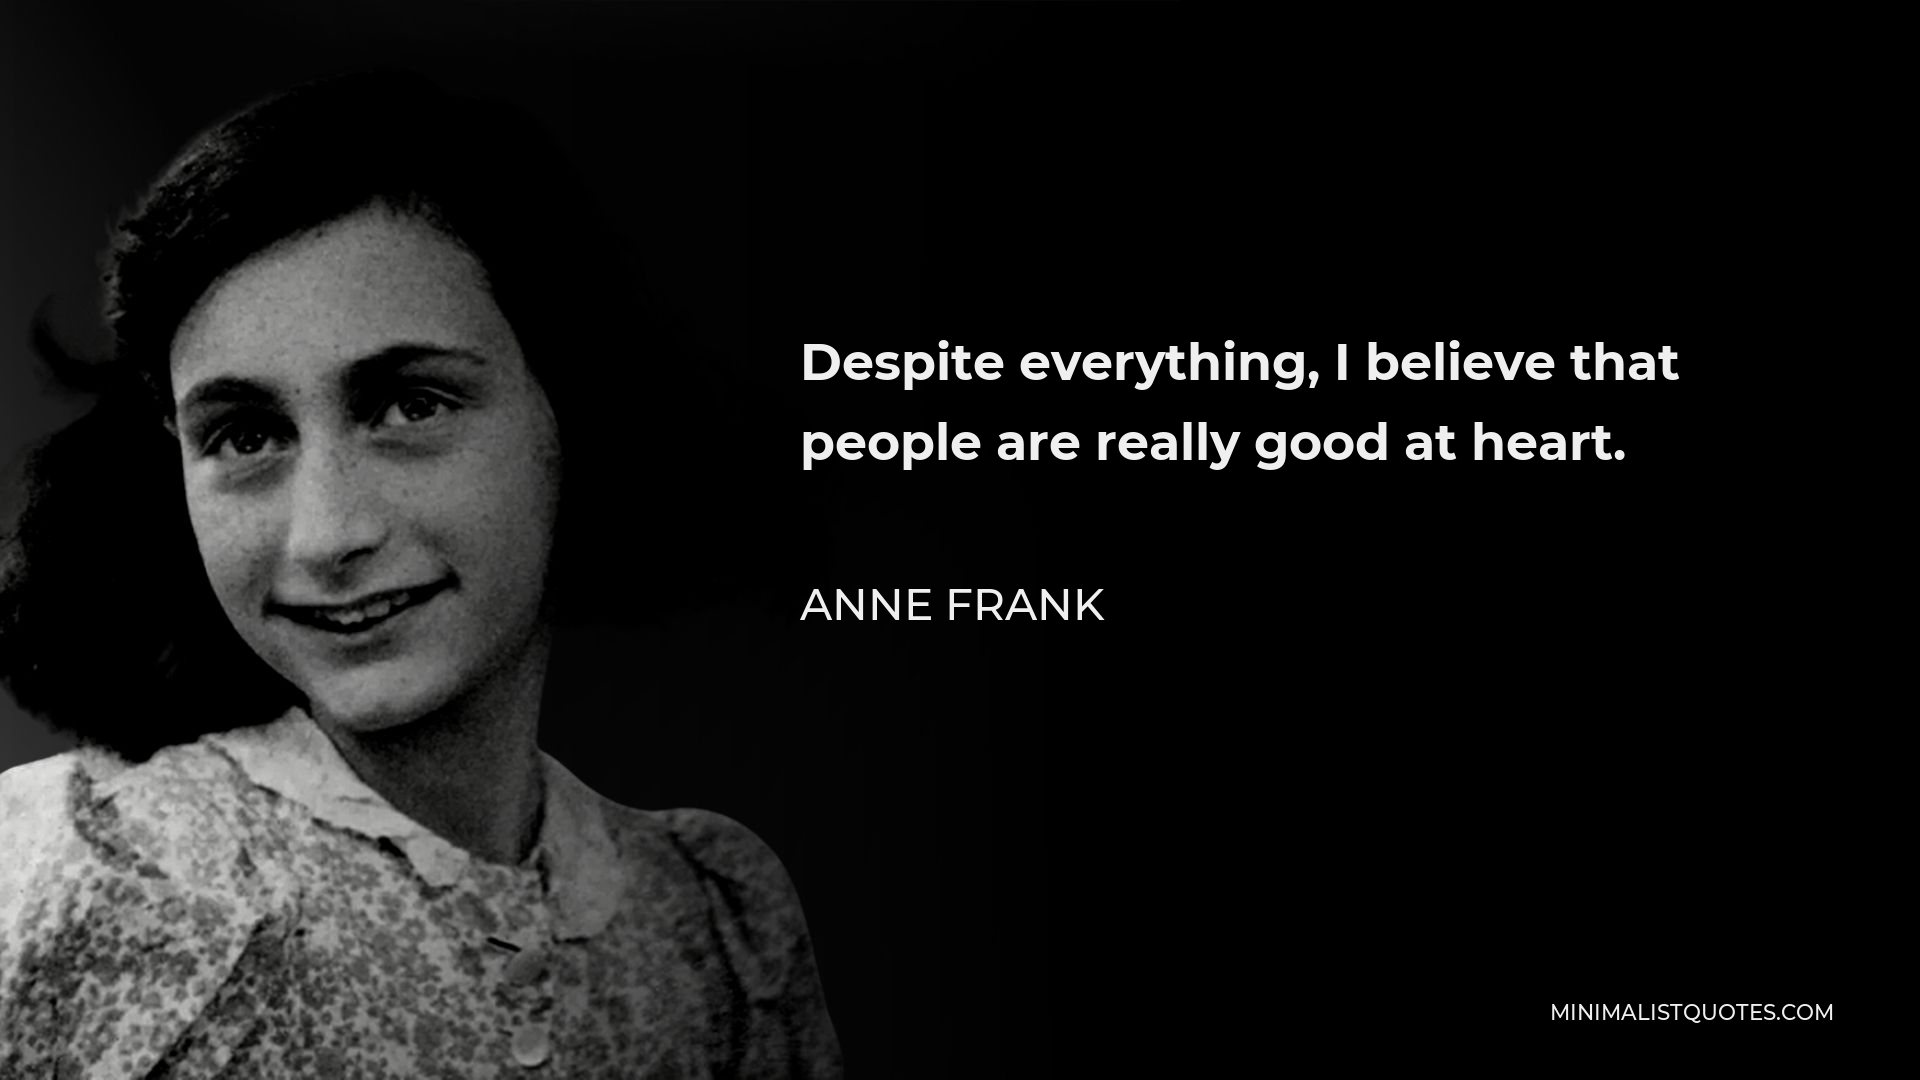 Anne Frank Quote - Despite everything, I believe that people are really good at heart.